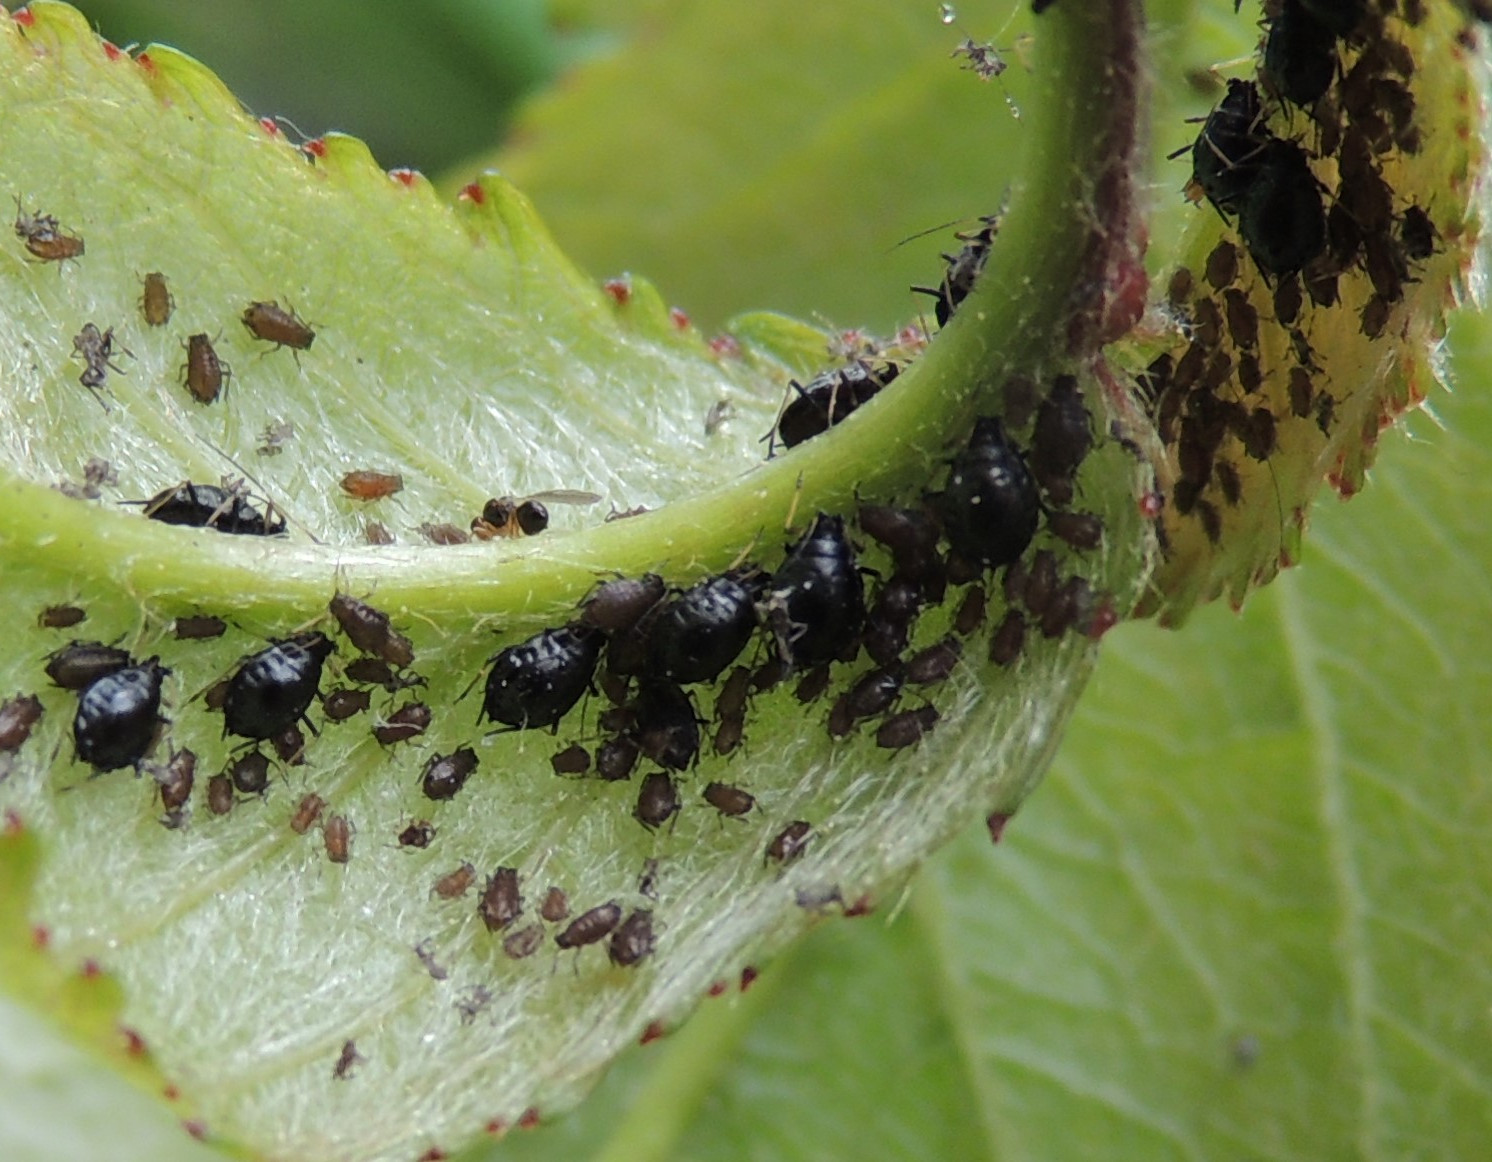 A study shows how aphids are affected by climate change